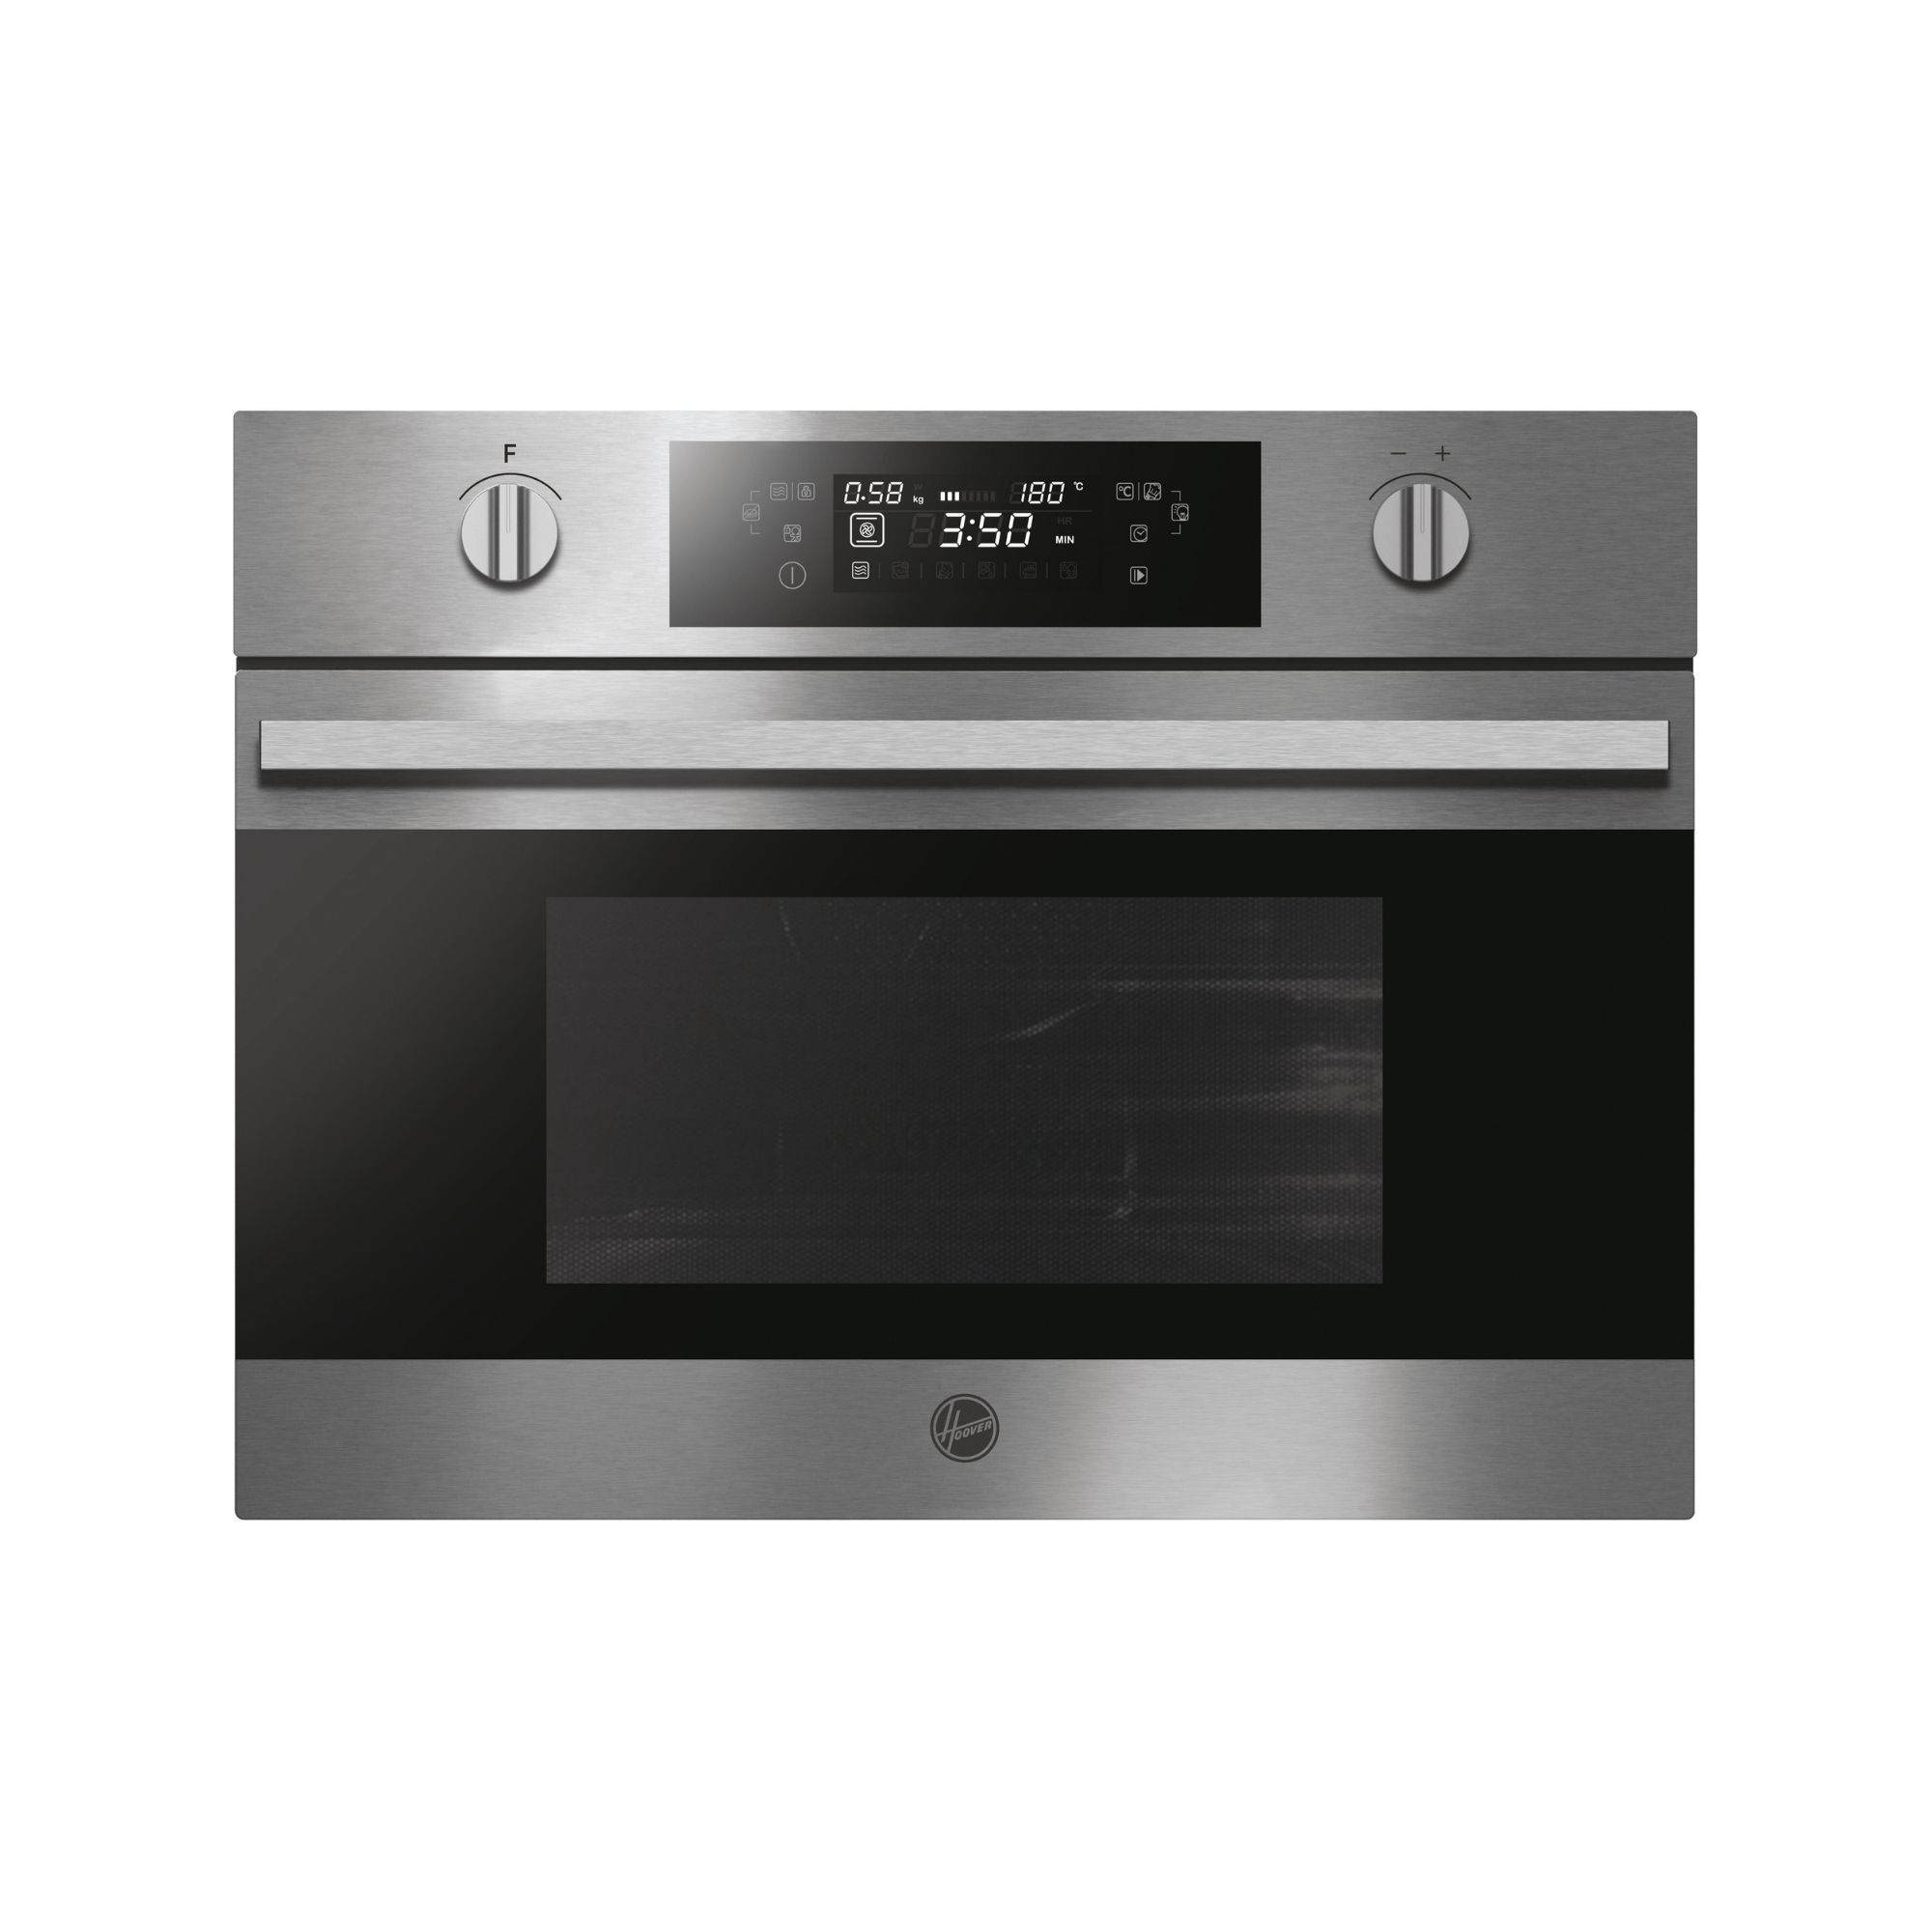 Hoover HMC440C3H 44L Built-in Microwave - Stainless steel